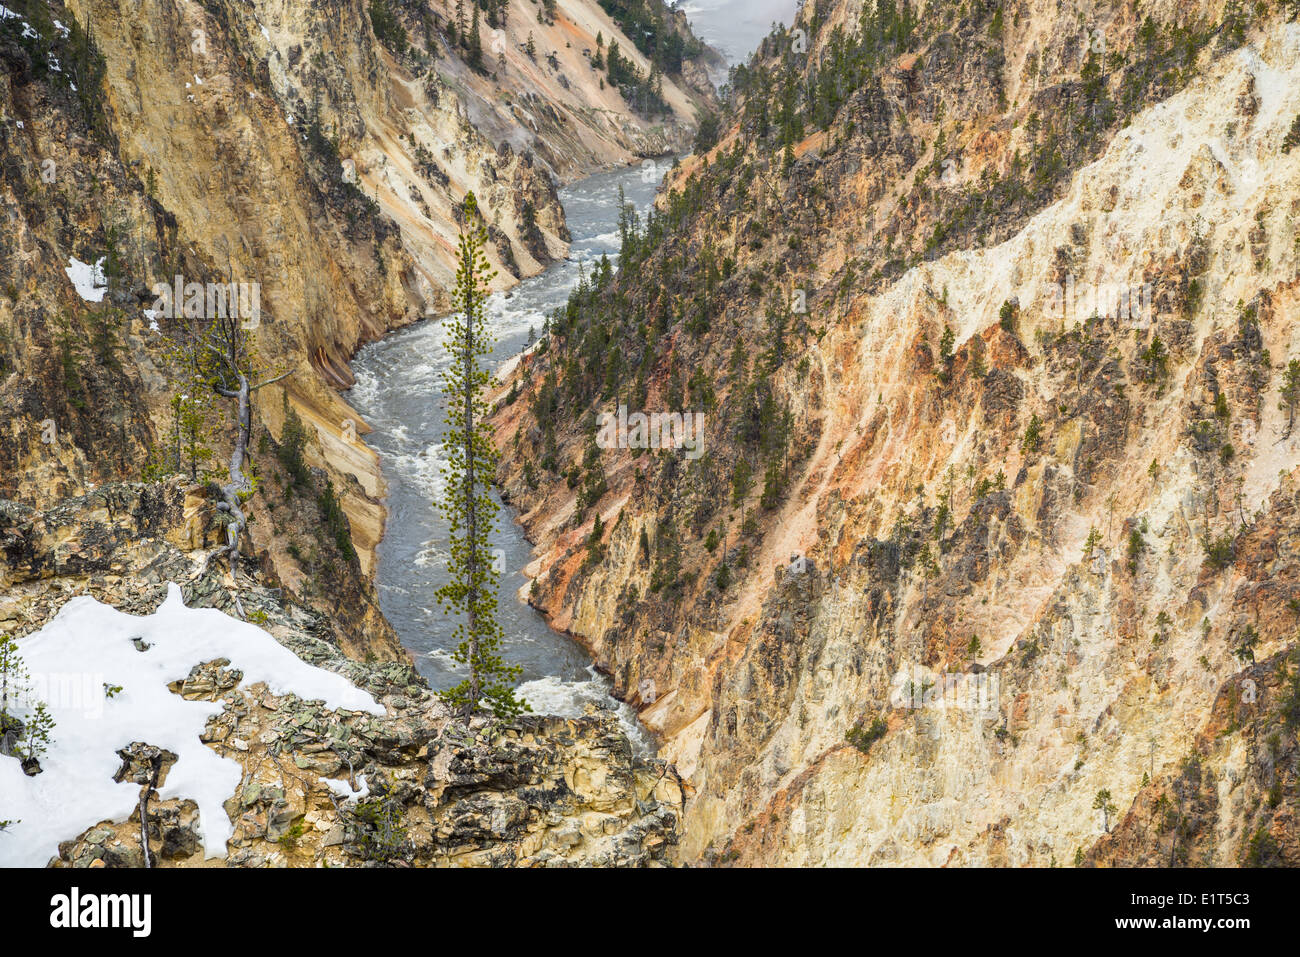 The Yellowstone River at the Grand Canyon of the Yellowstone National Park, Wyoming, USA. Stock Photo